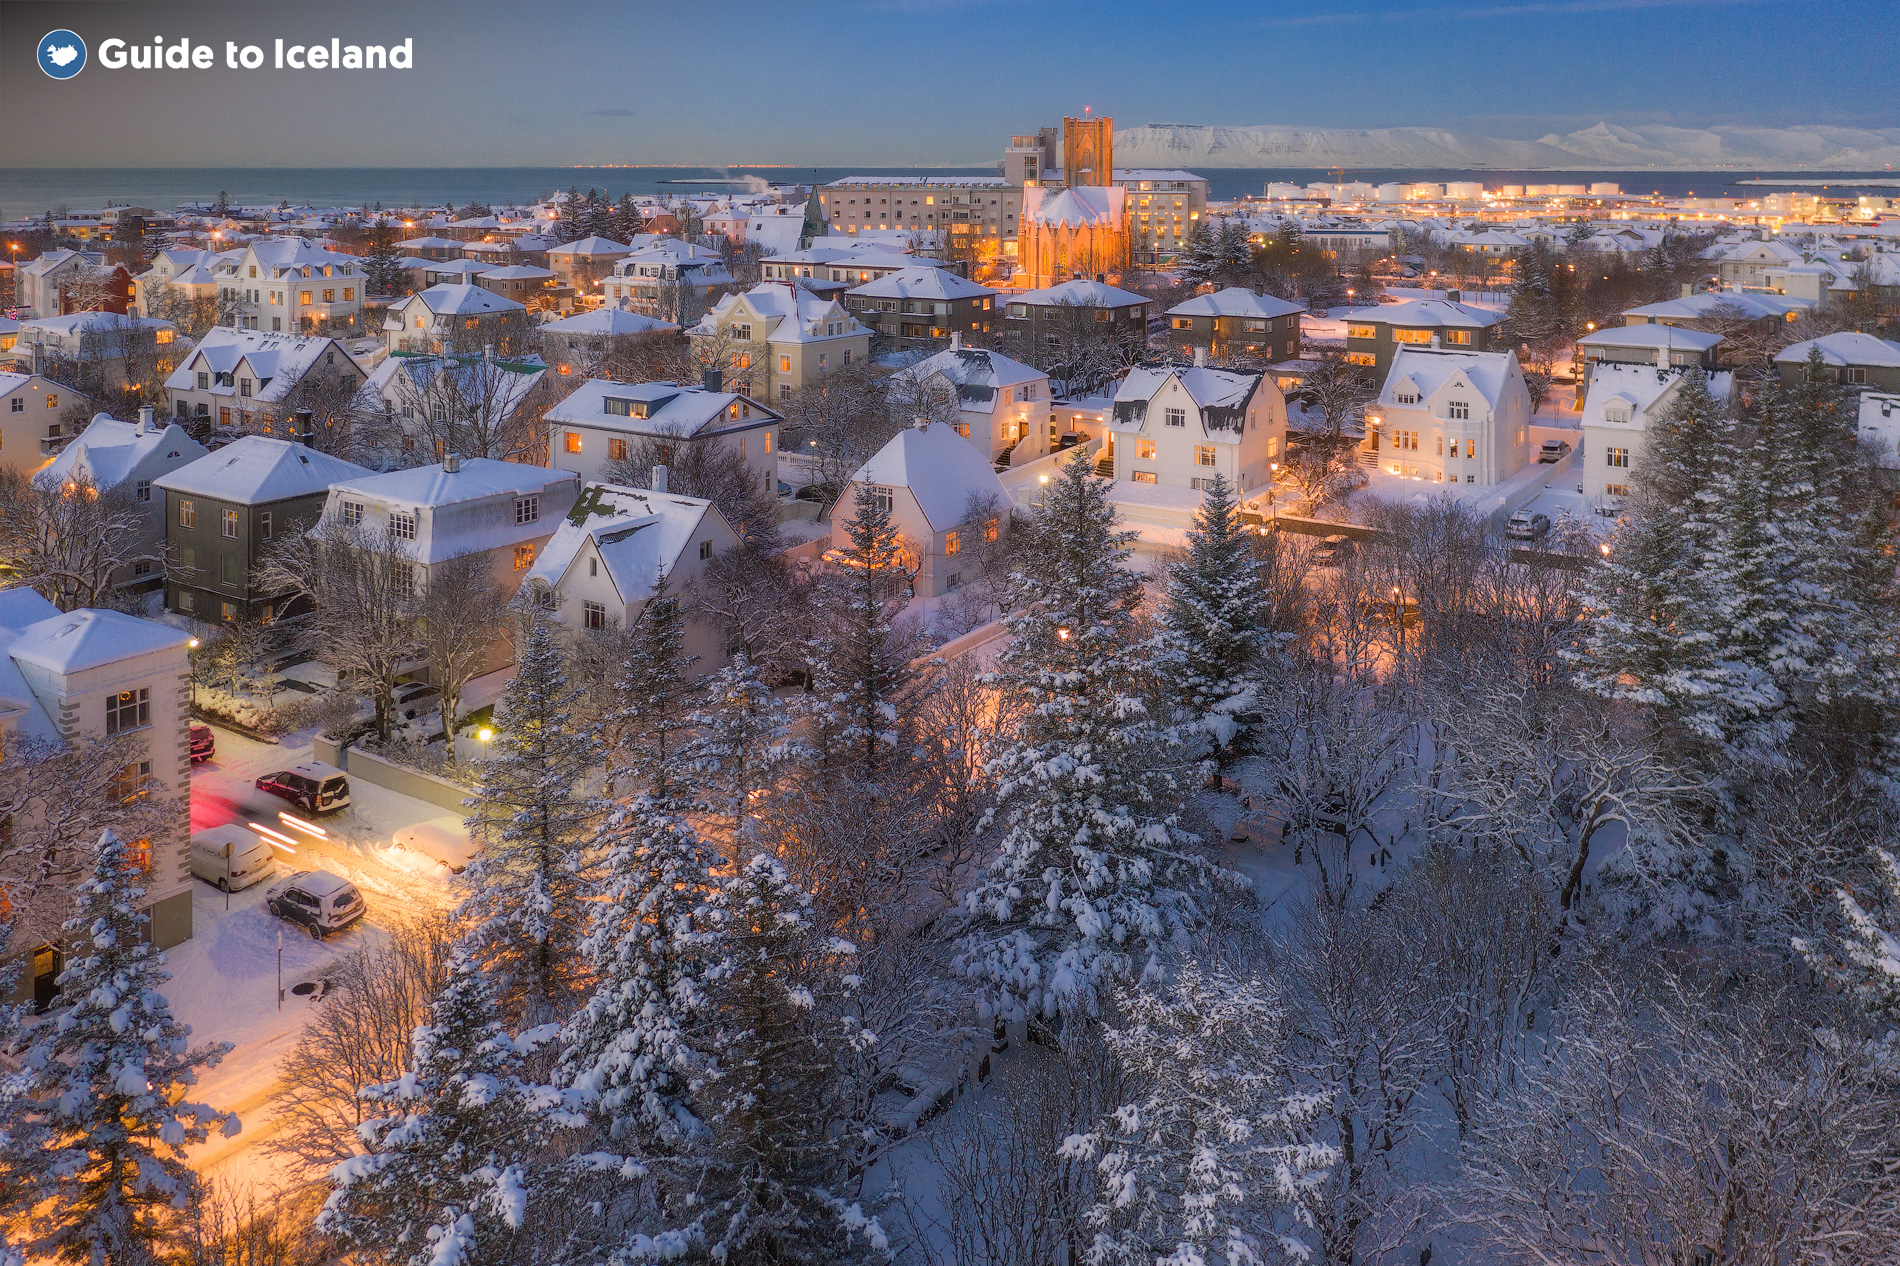 Reykjavik, the capital of Iceland, has a population of around 200,000.